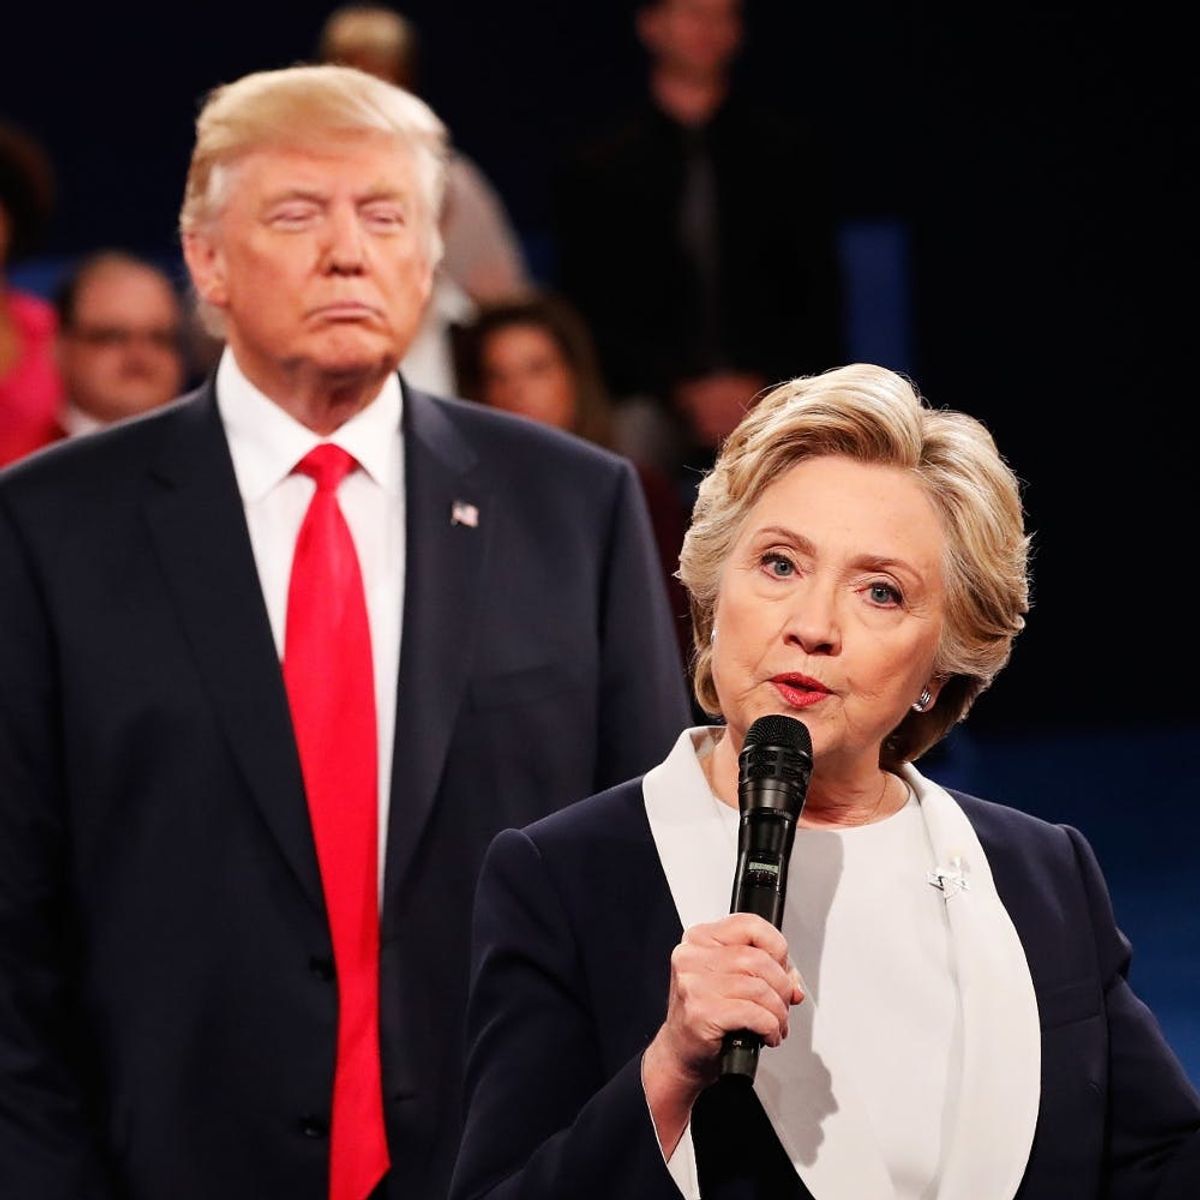 Check Out Celebs’ Intense Reactions to the Second Presidential Debate